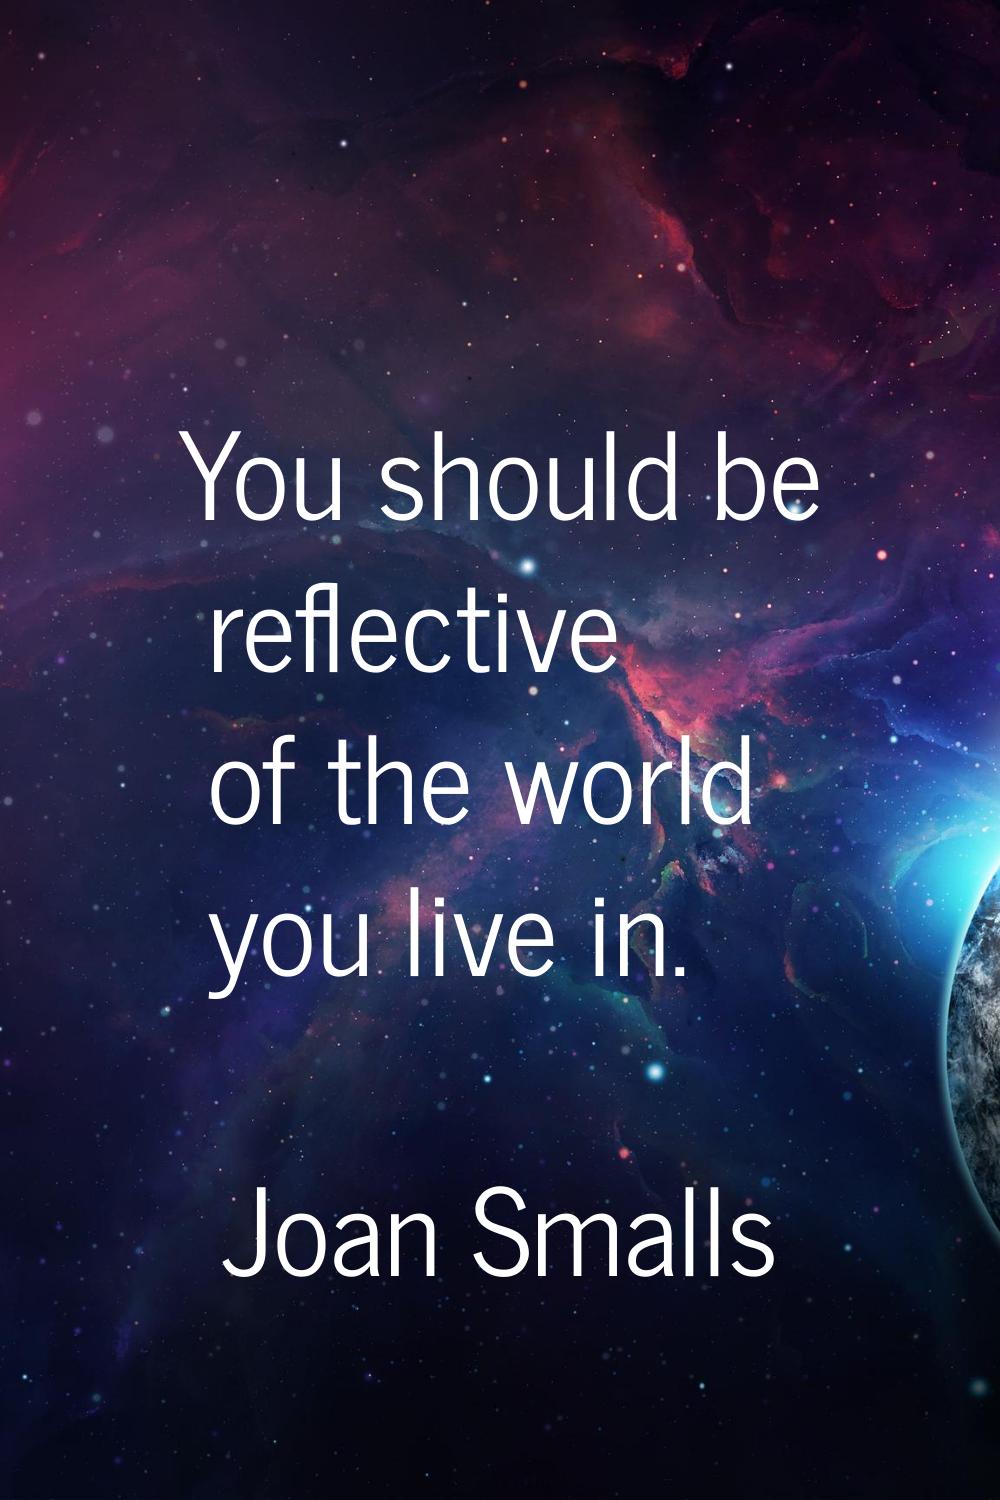 You should be reflective of the world you live in.